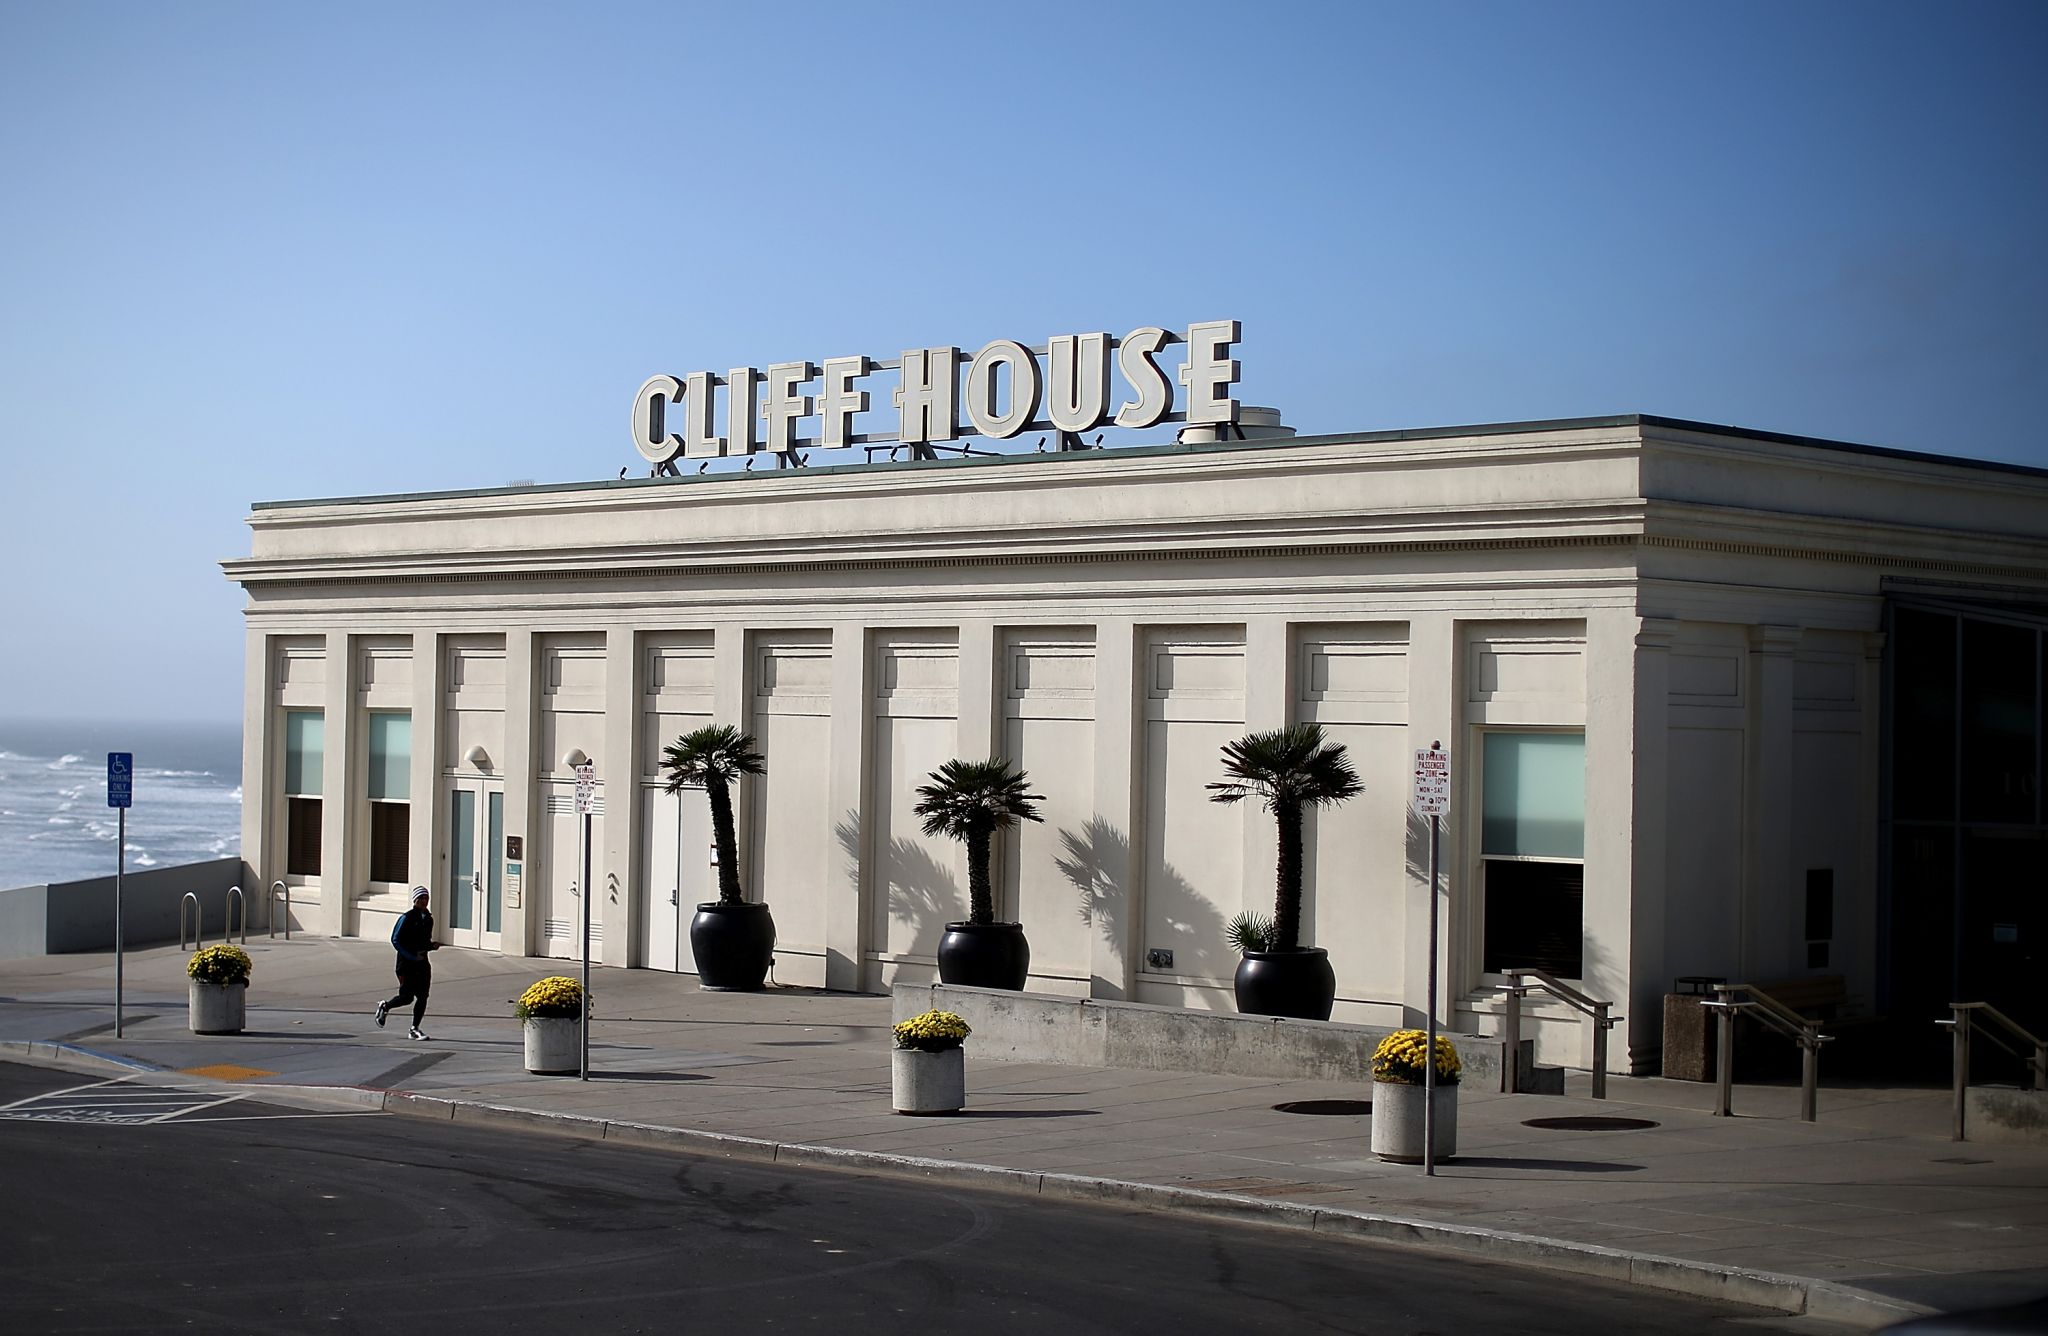 San Francisco's iconic Cliff House space to reopen with new restaurant in 2022